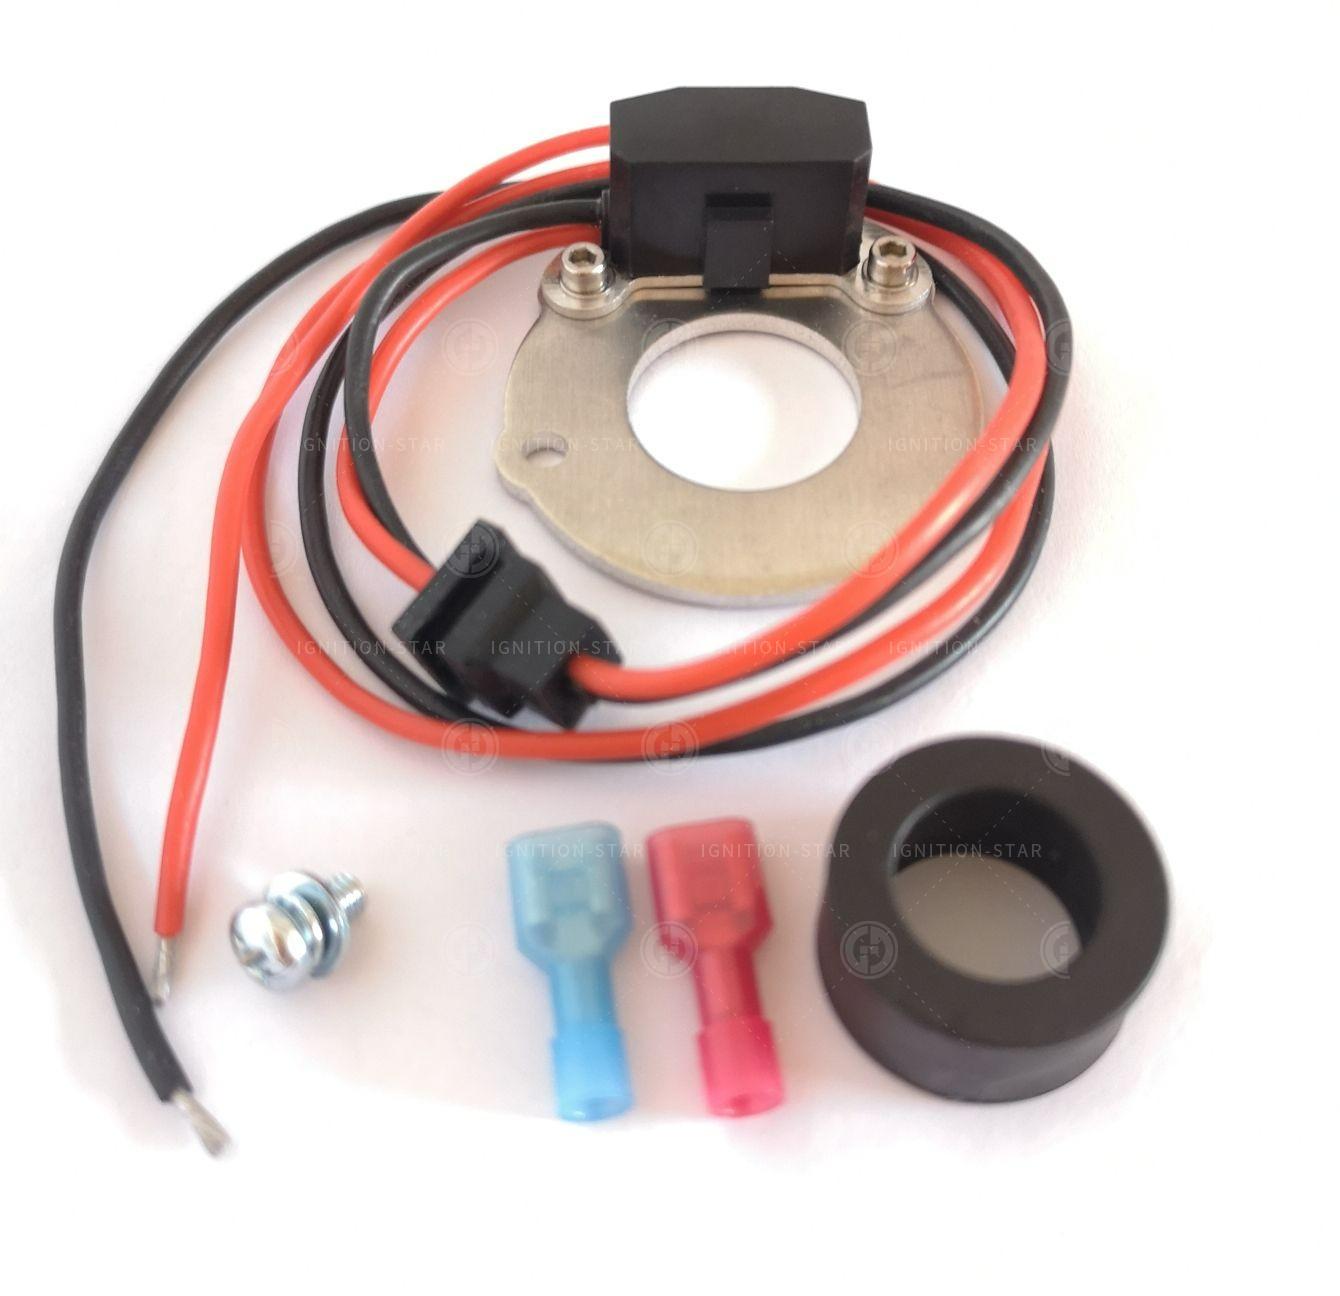  BOSCH 009  ELECTRONIC IGNITION KIT 